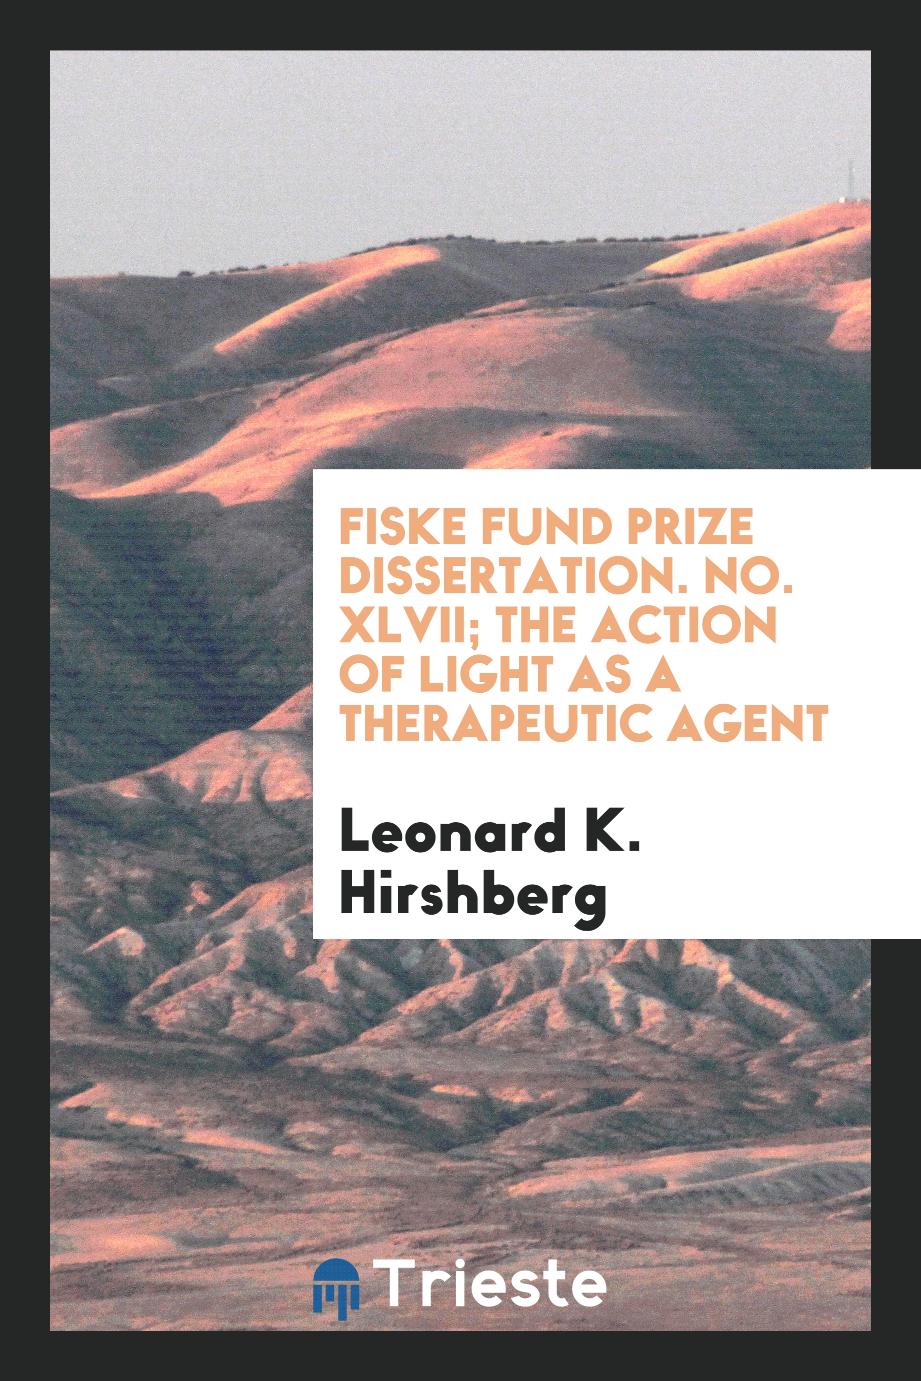 Fiske Fund Prize Dissertation. No. XLVII; The Action of Light as a Therapeutic Agent